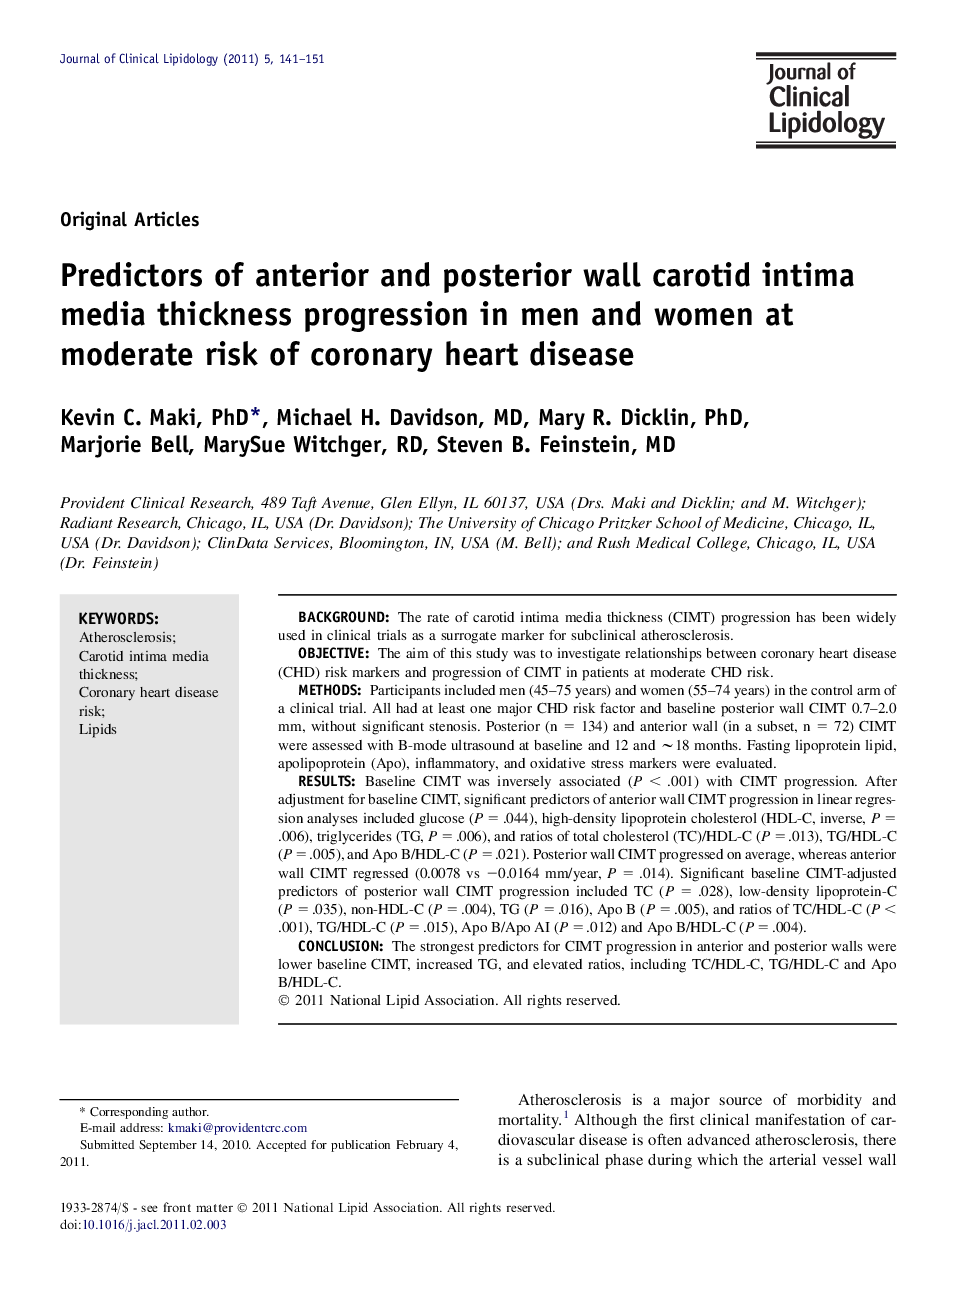 Predictors of anterior and posterior wall carotid intima media thickness progression in men and women at moderate risk of coronary heart disease